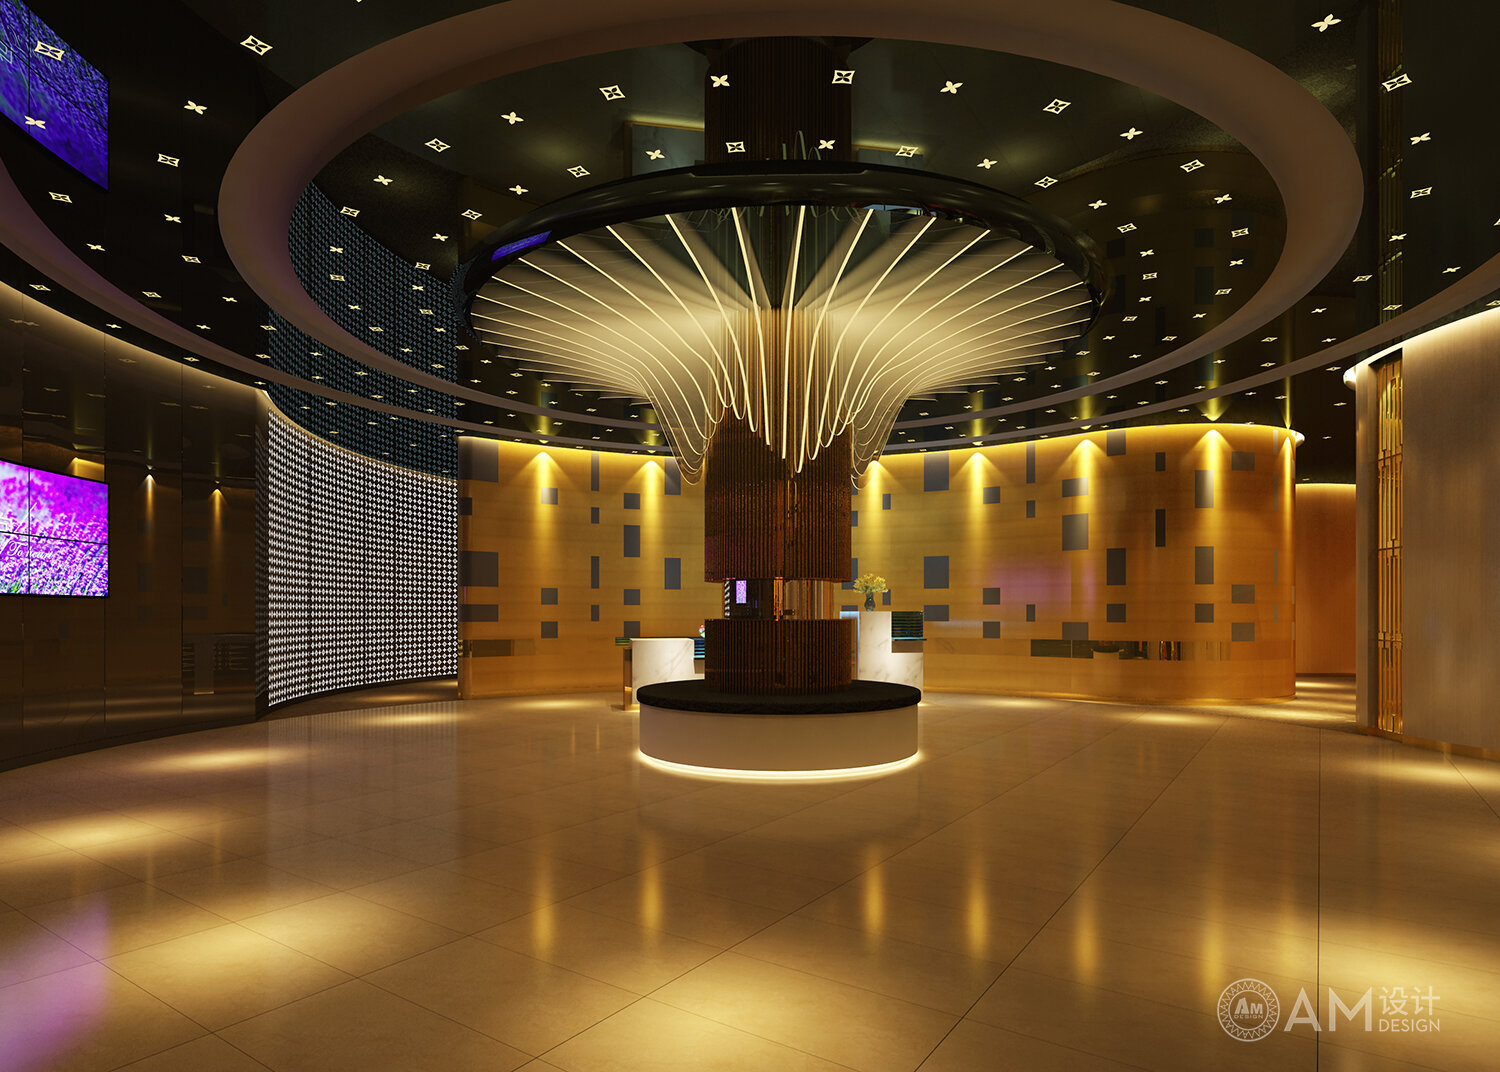 AM | Lobby design of top spa spa in Sijihuacheng